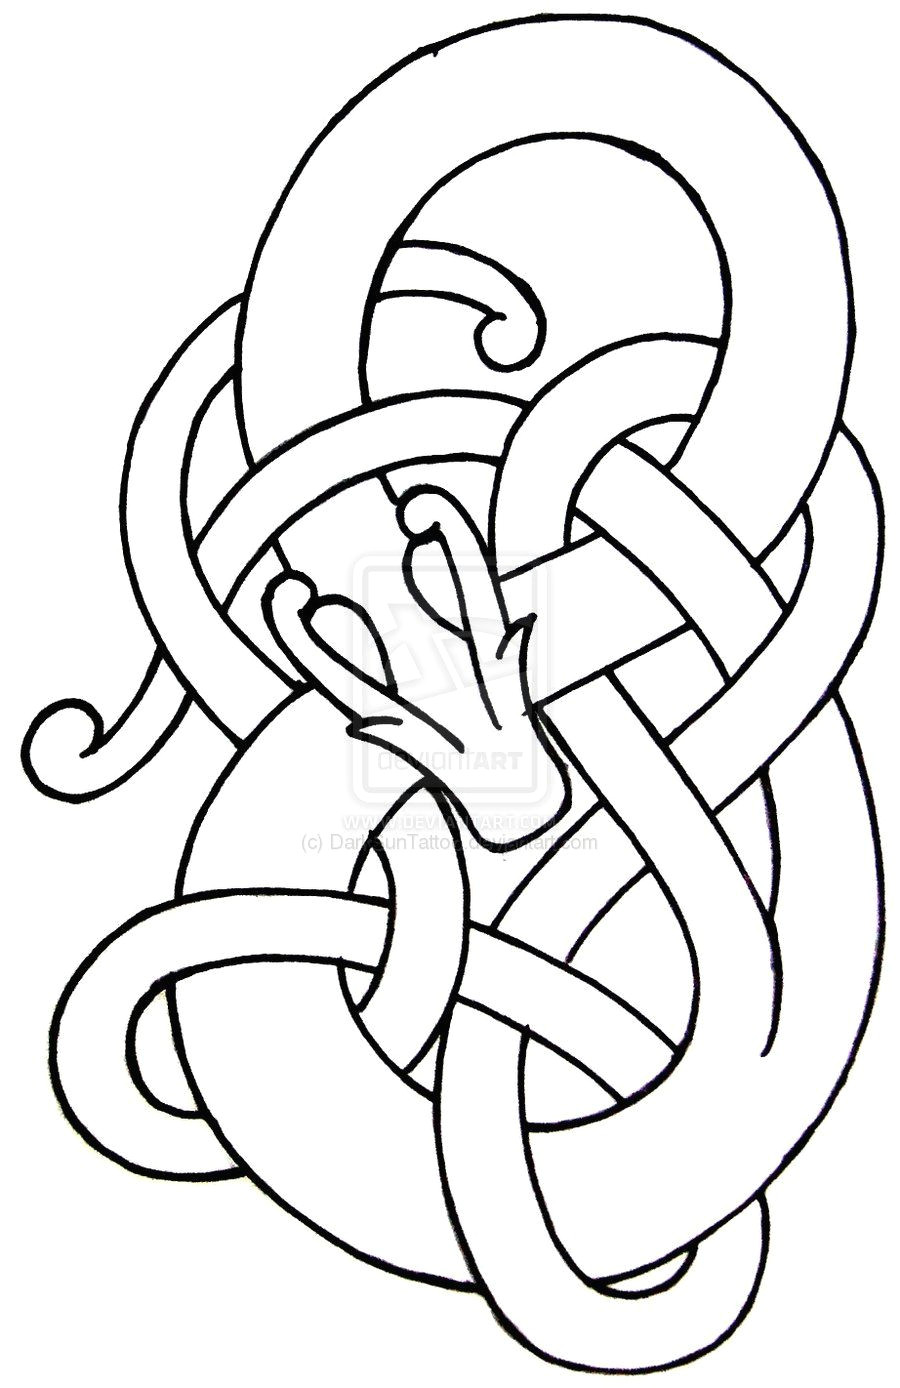 Viking Patterns Easy to Draw norse Dragon Pattern I Want to Turn This Into A Snake that